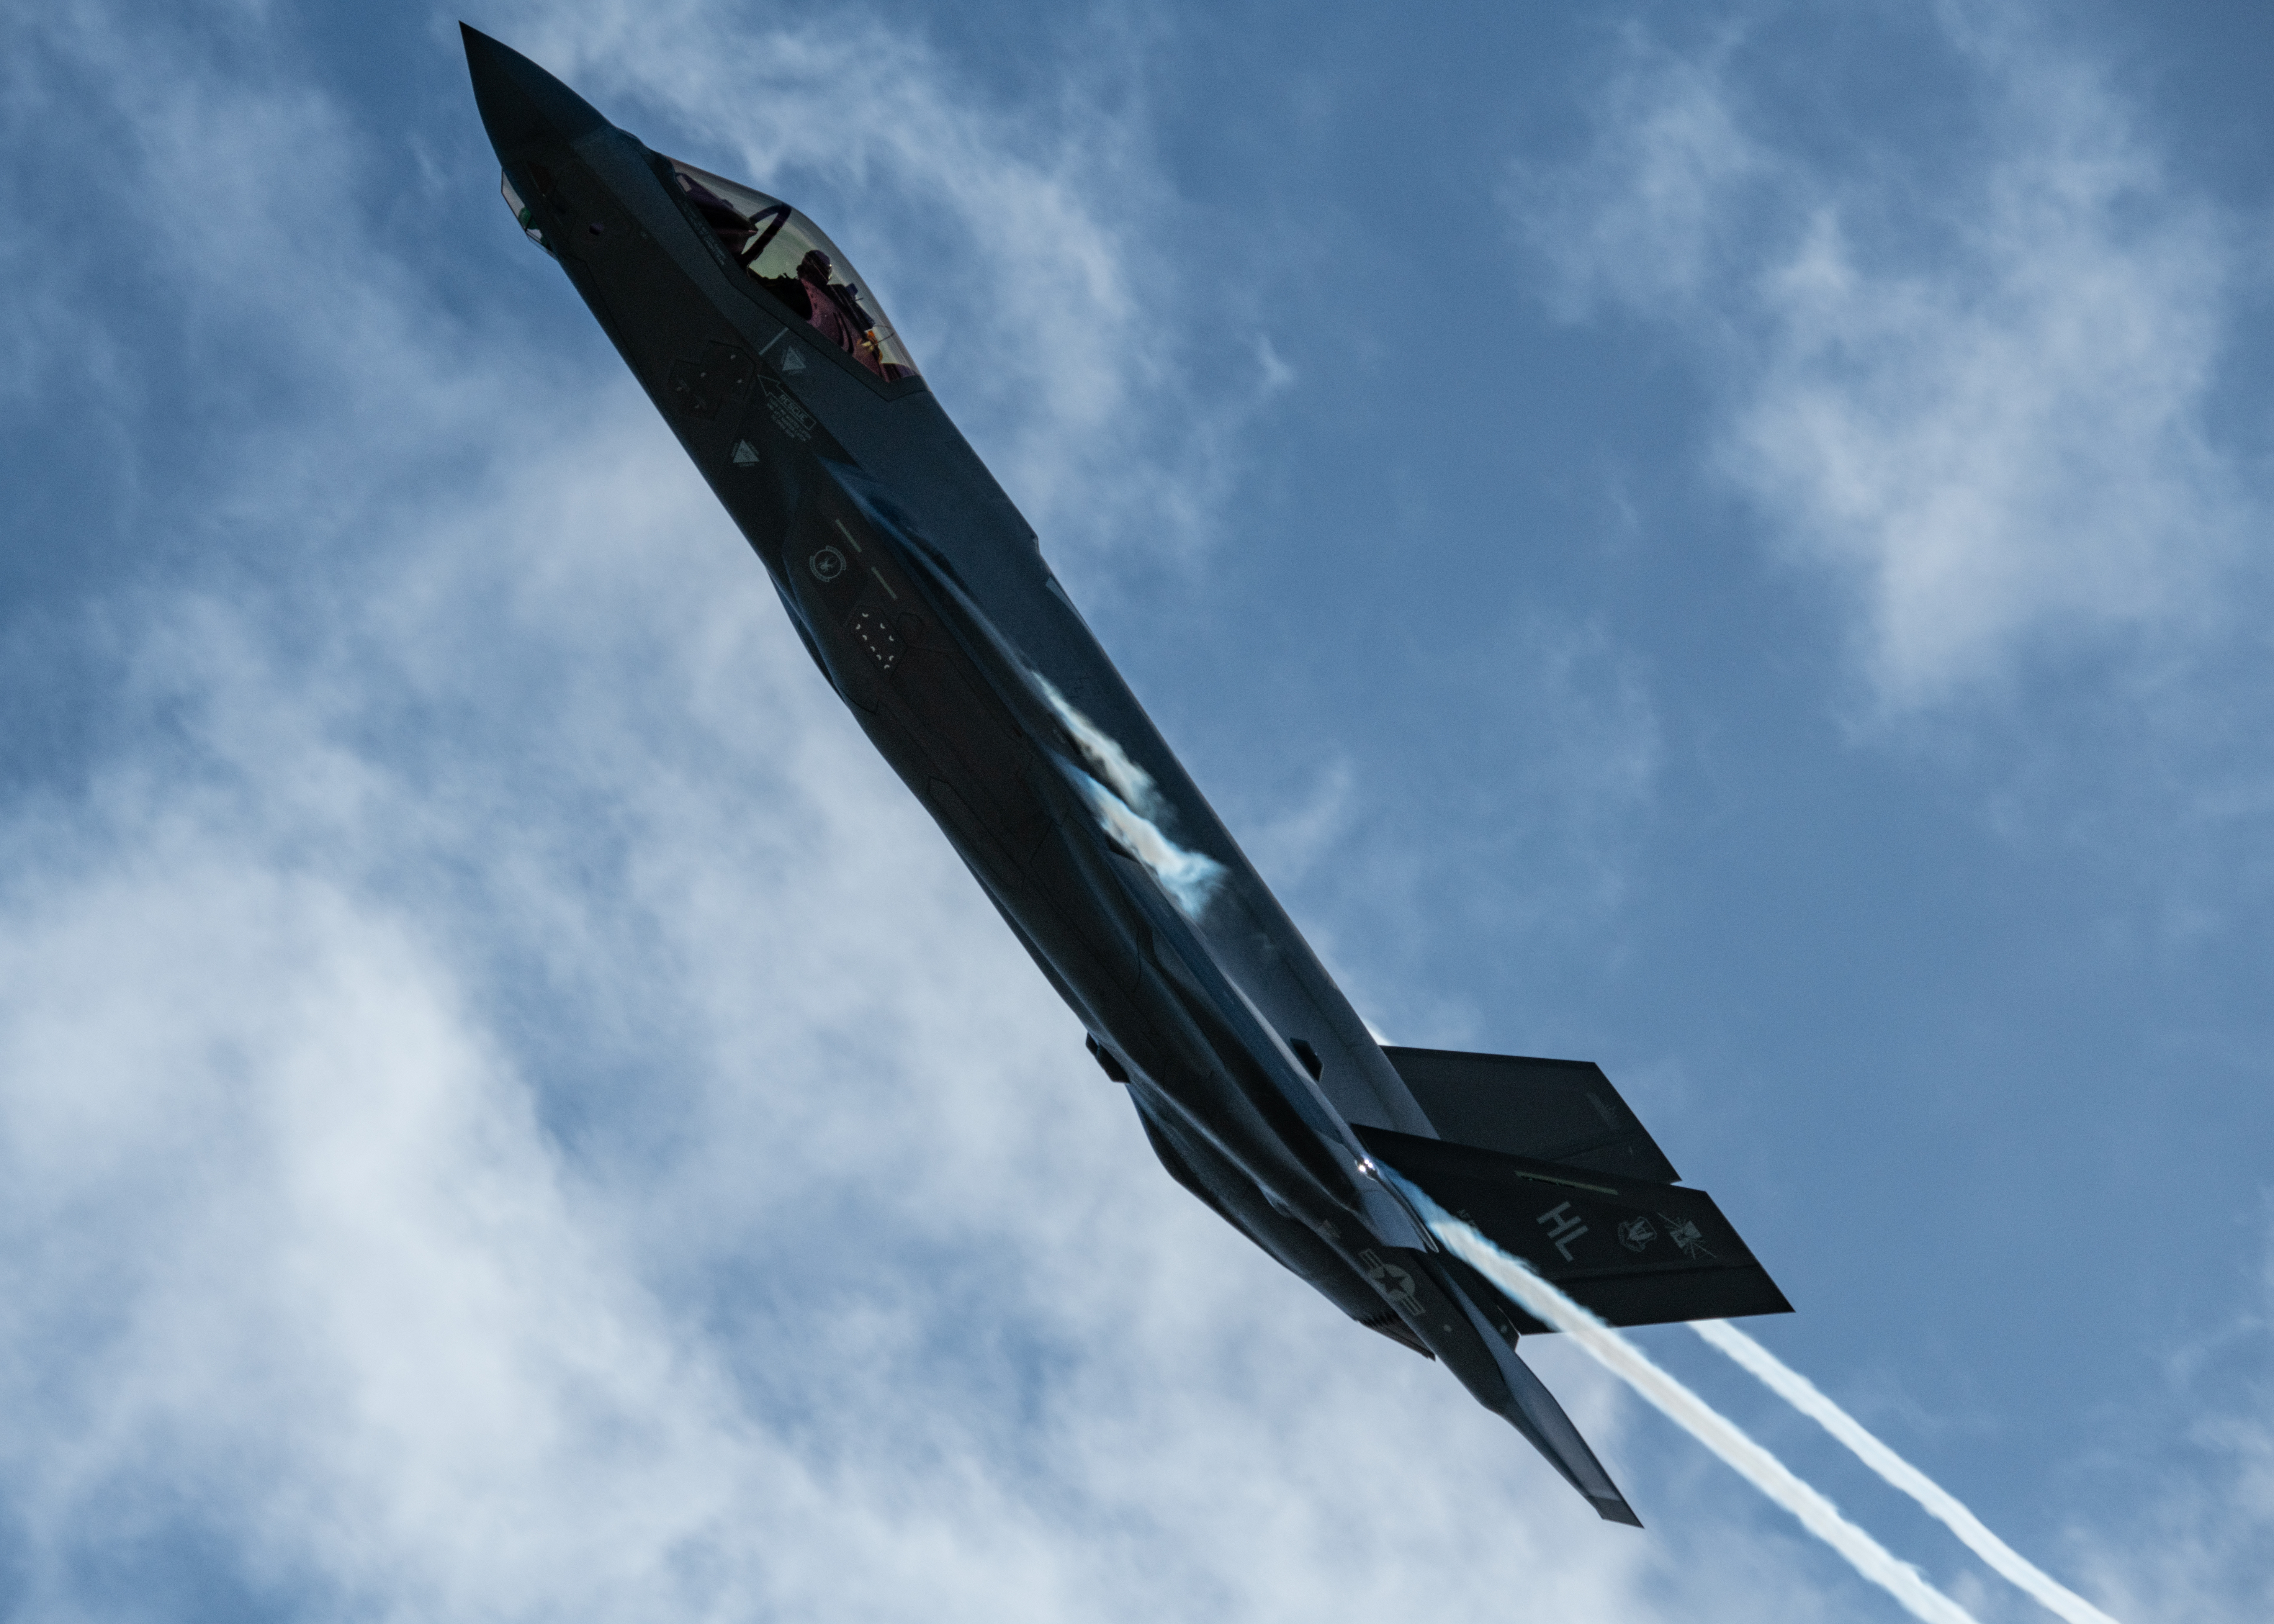 F35 Demo Team at the 2020 Ft. Lauderdale Air Show